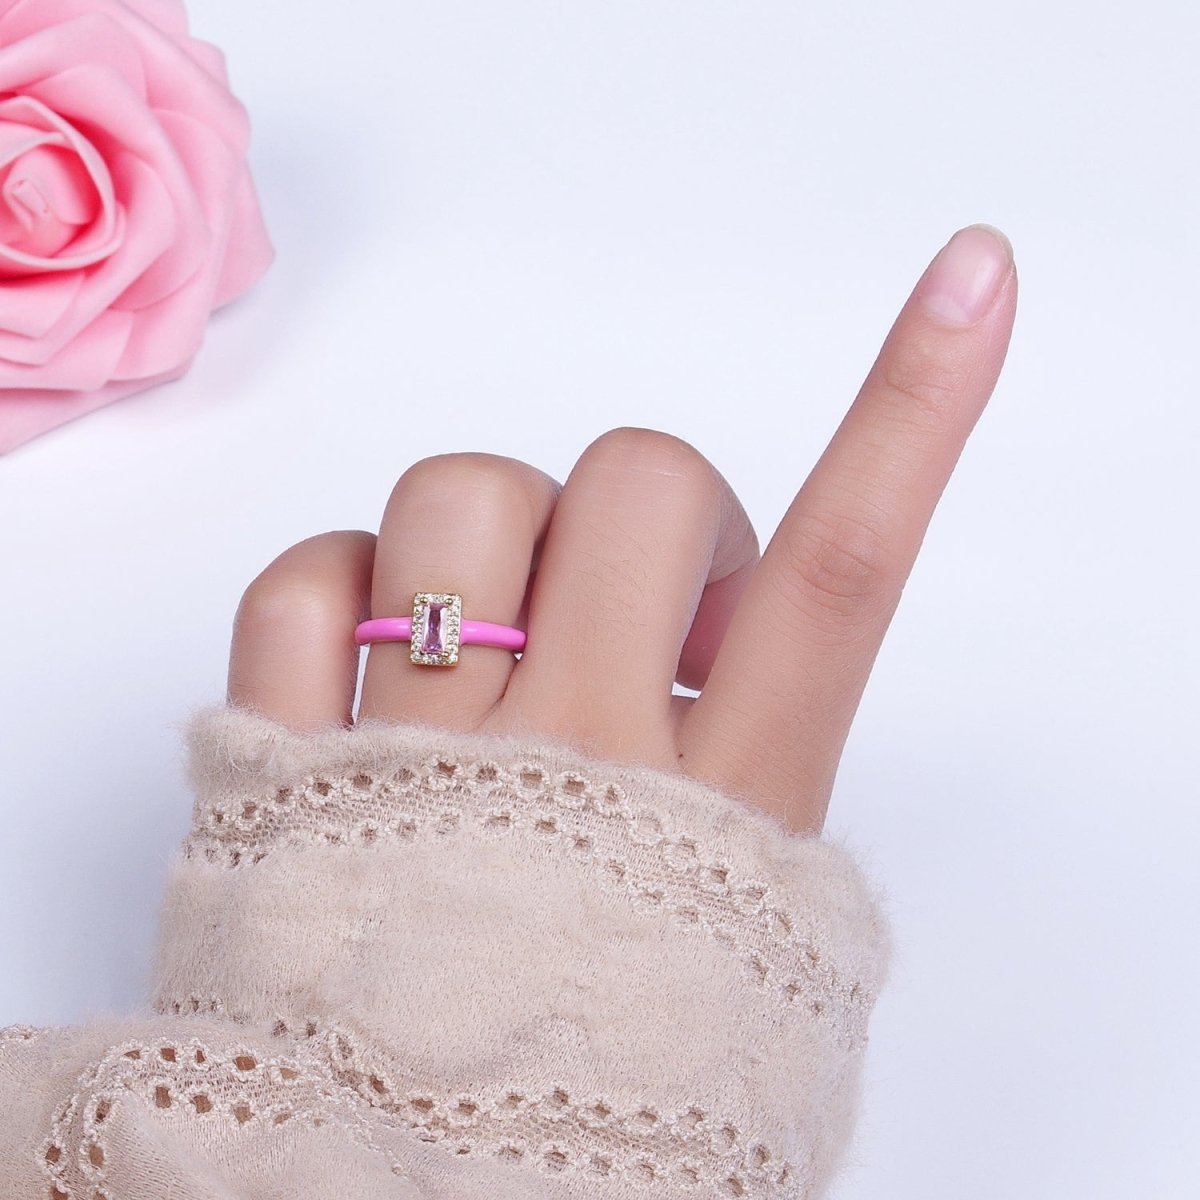 Gold Filled Barbiecore Baguette Green, White, Pink Micro Paved Enamel Adjustable Ring | Y-349~Y-351 - DLUXCA